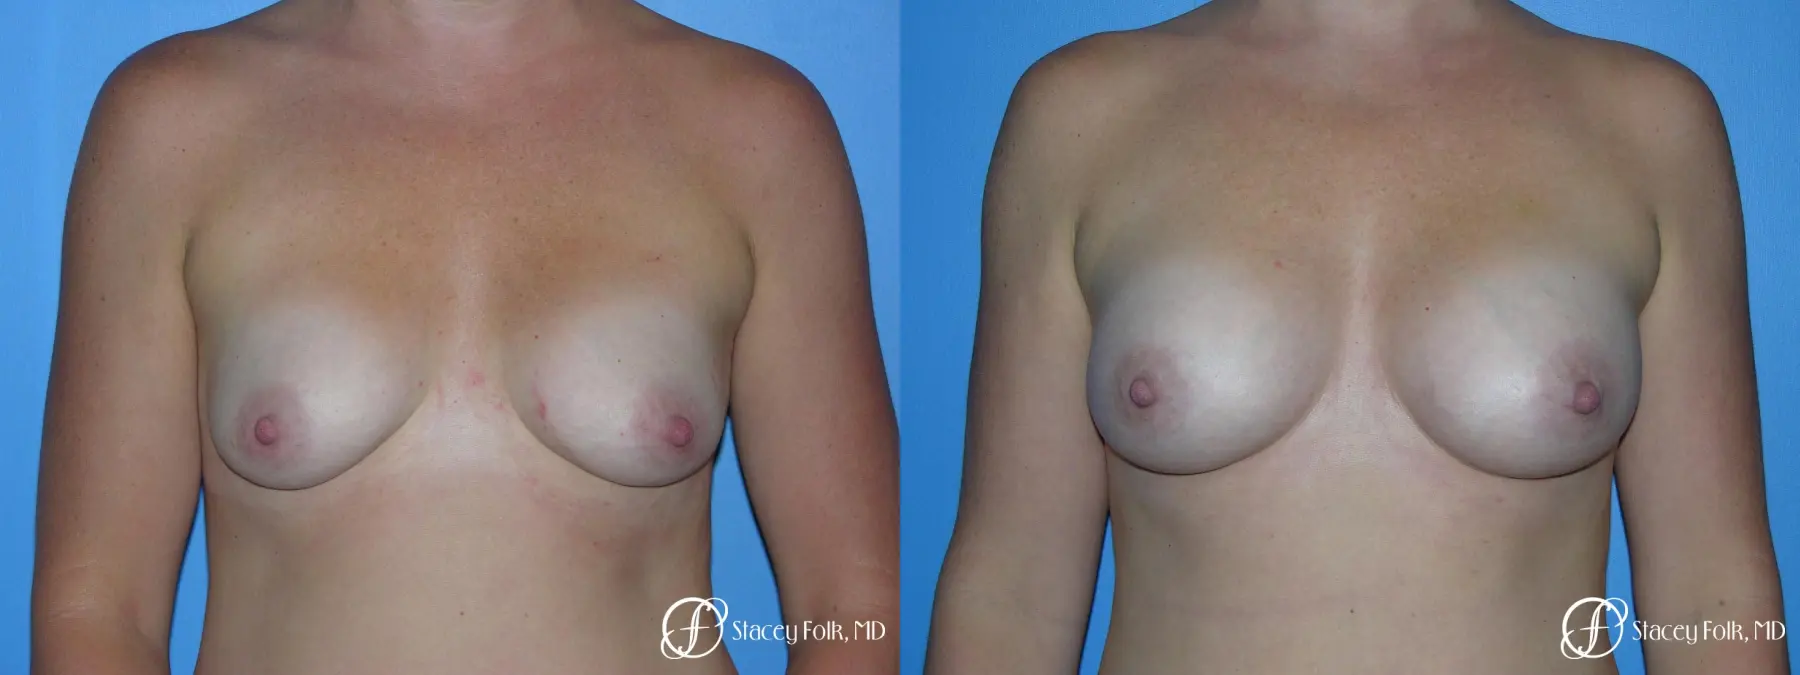 Denver Breast Augmentation with Fat Transfer to the Breast 6917 - Before and After